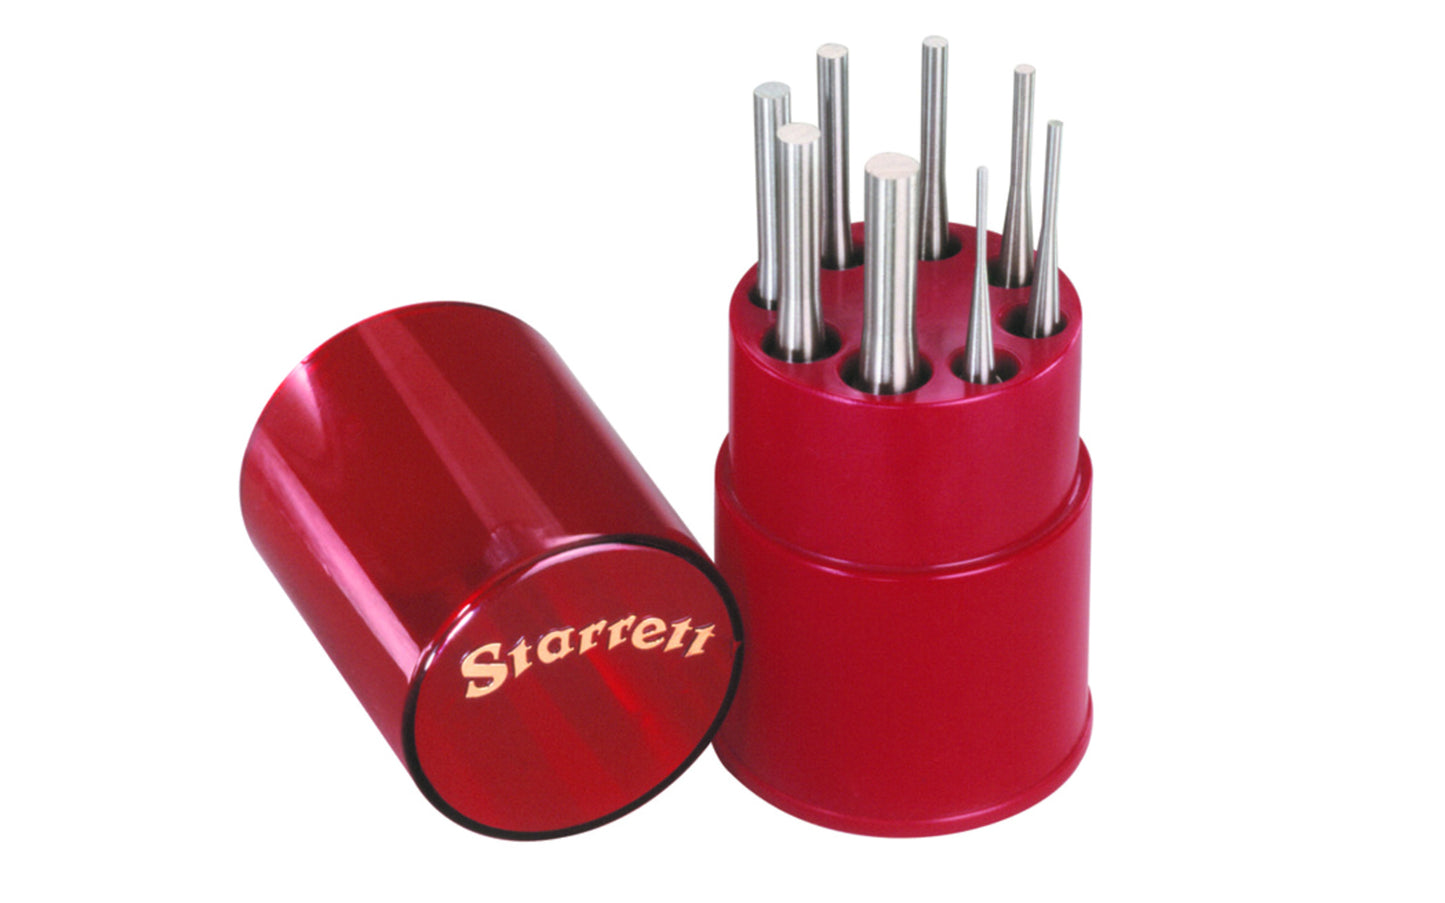 Starrett Drive Pin Punch Set. Model No. S565WB. The punches are well proportioned, hardened, properly tempered, nicely finished, & have a knurled finger grip. Each punch has the size stamped on the head. Sizes included: 1/16", 3/32", 1/8", 5/32", 3/16", 7/32", 1/4", 5/16". Includes round red plastic box.  Made in USA. 049659525861